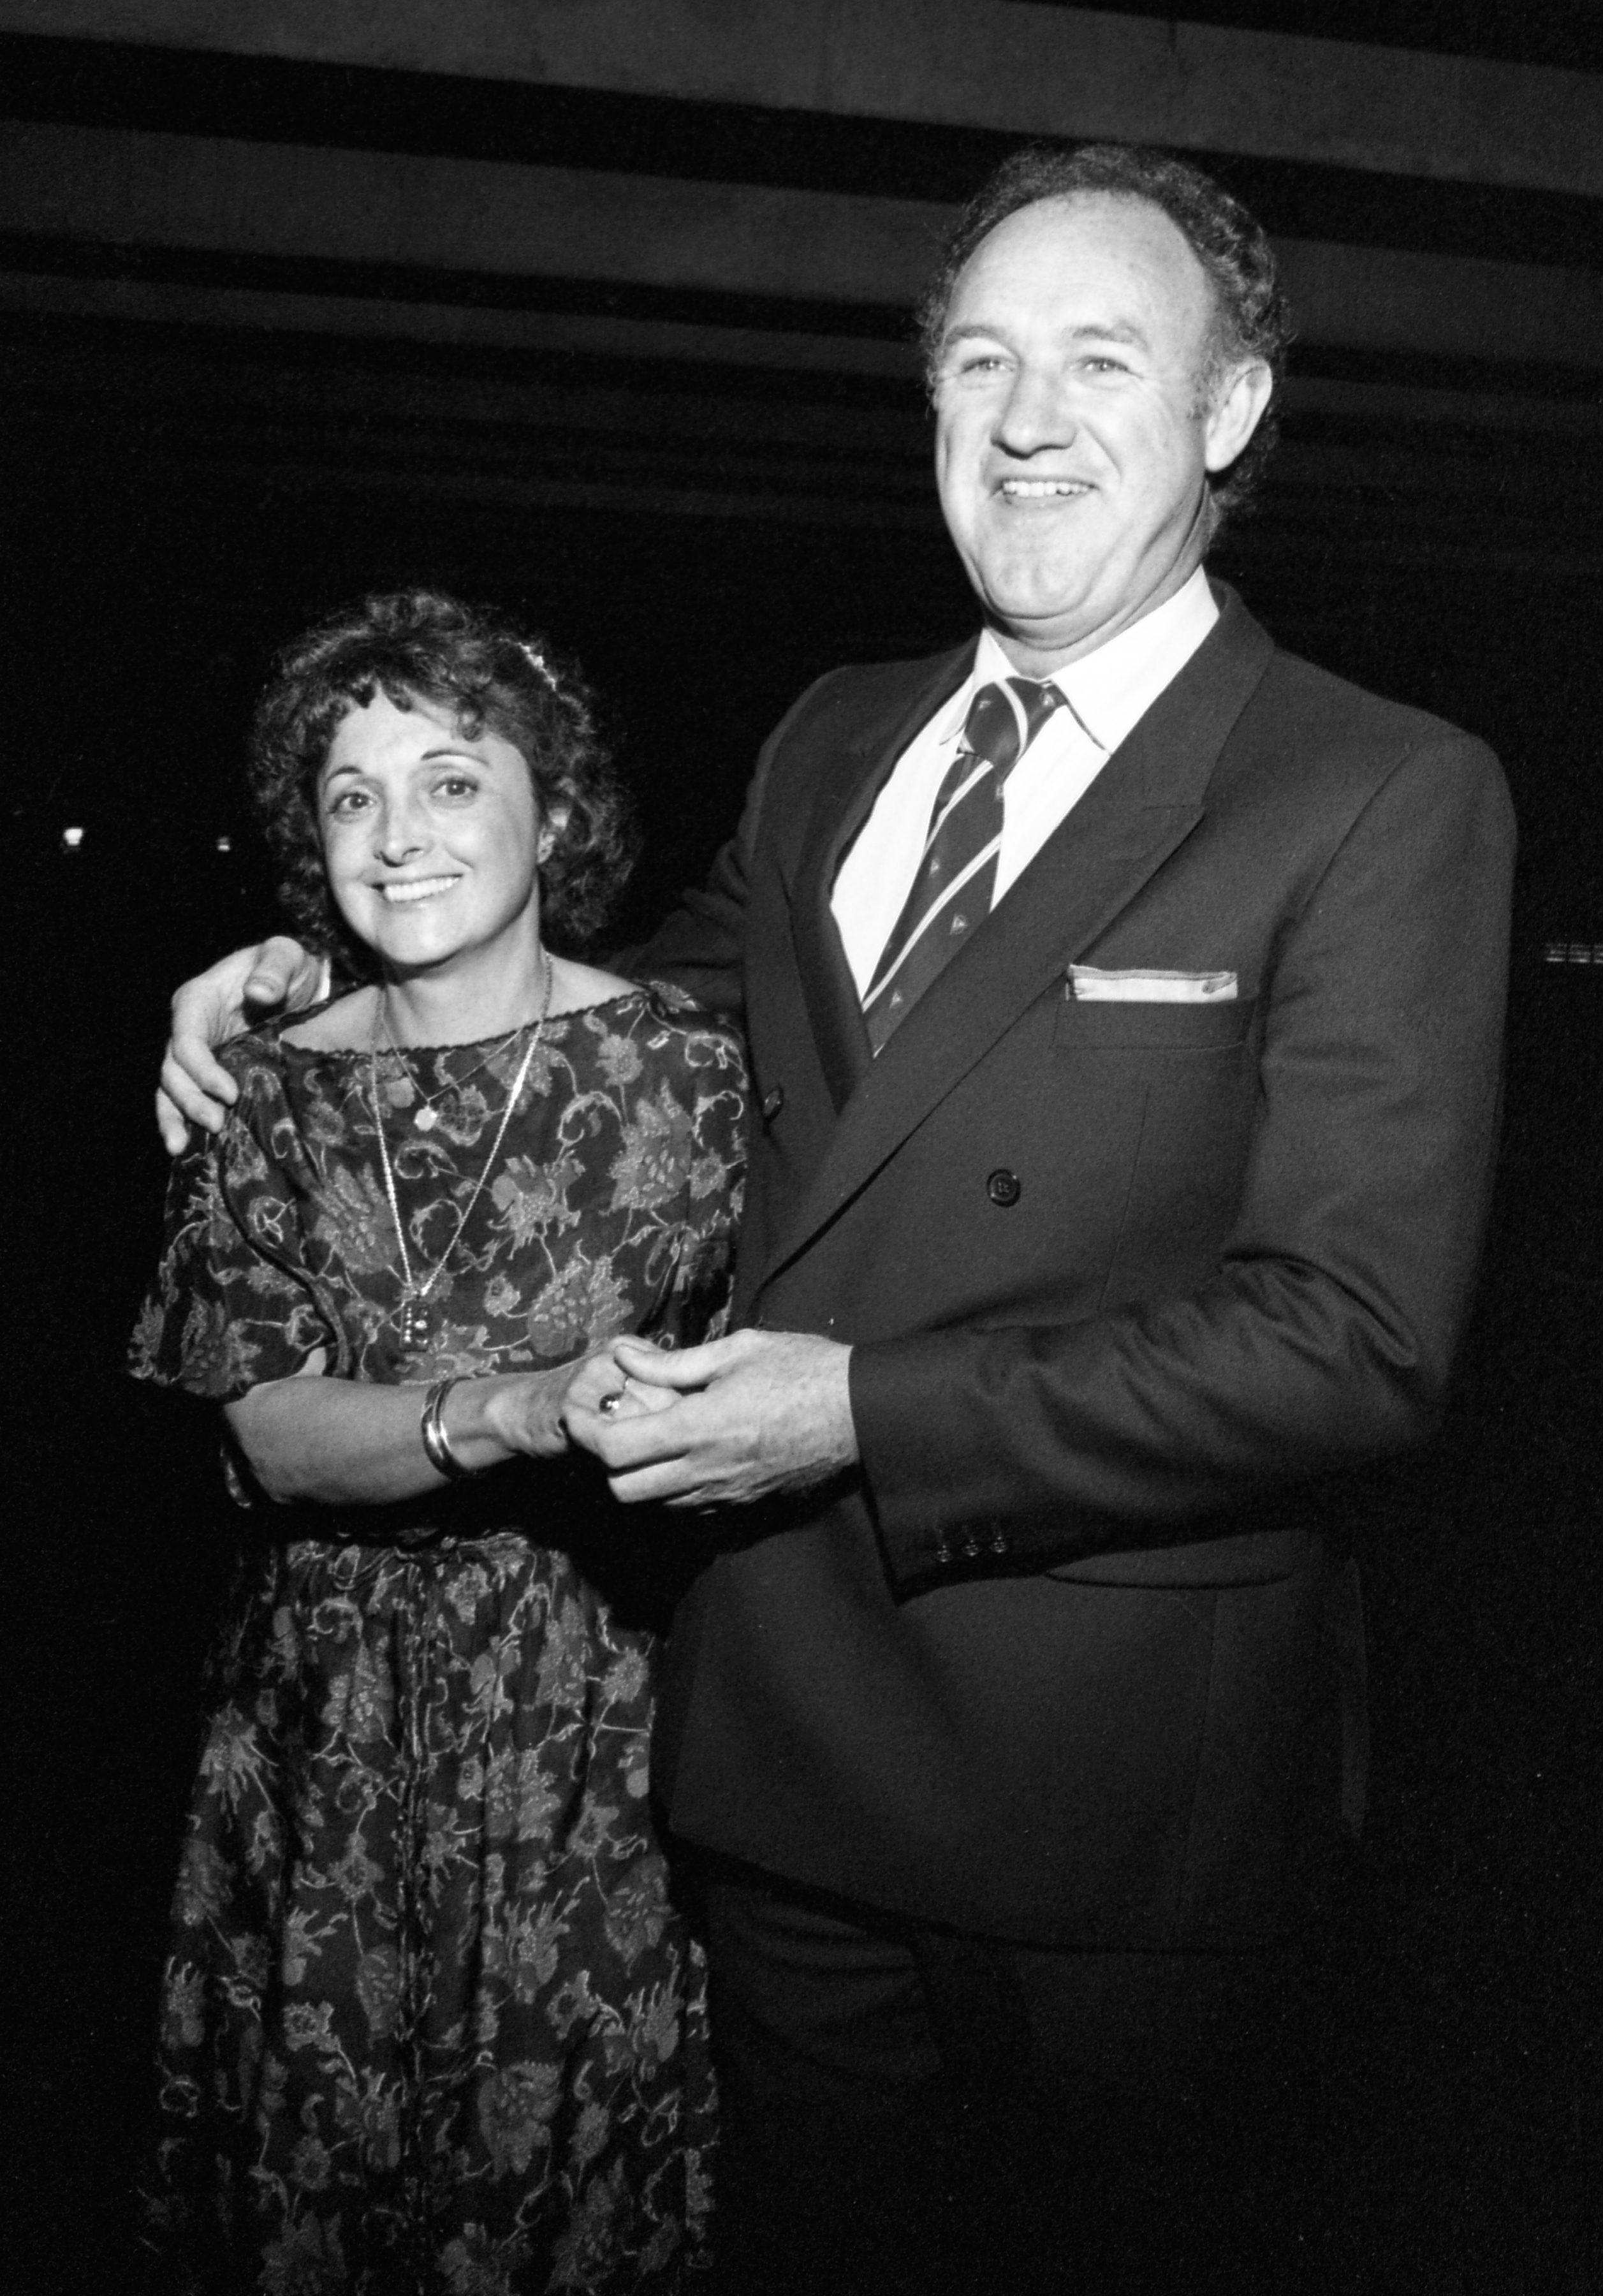 Gene Hackman and his first wife, Faye Maltese, are all smiles as they pose for a photograph in the 1980s